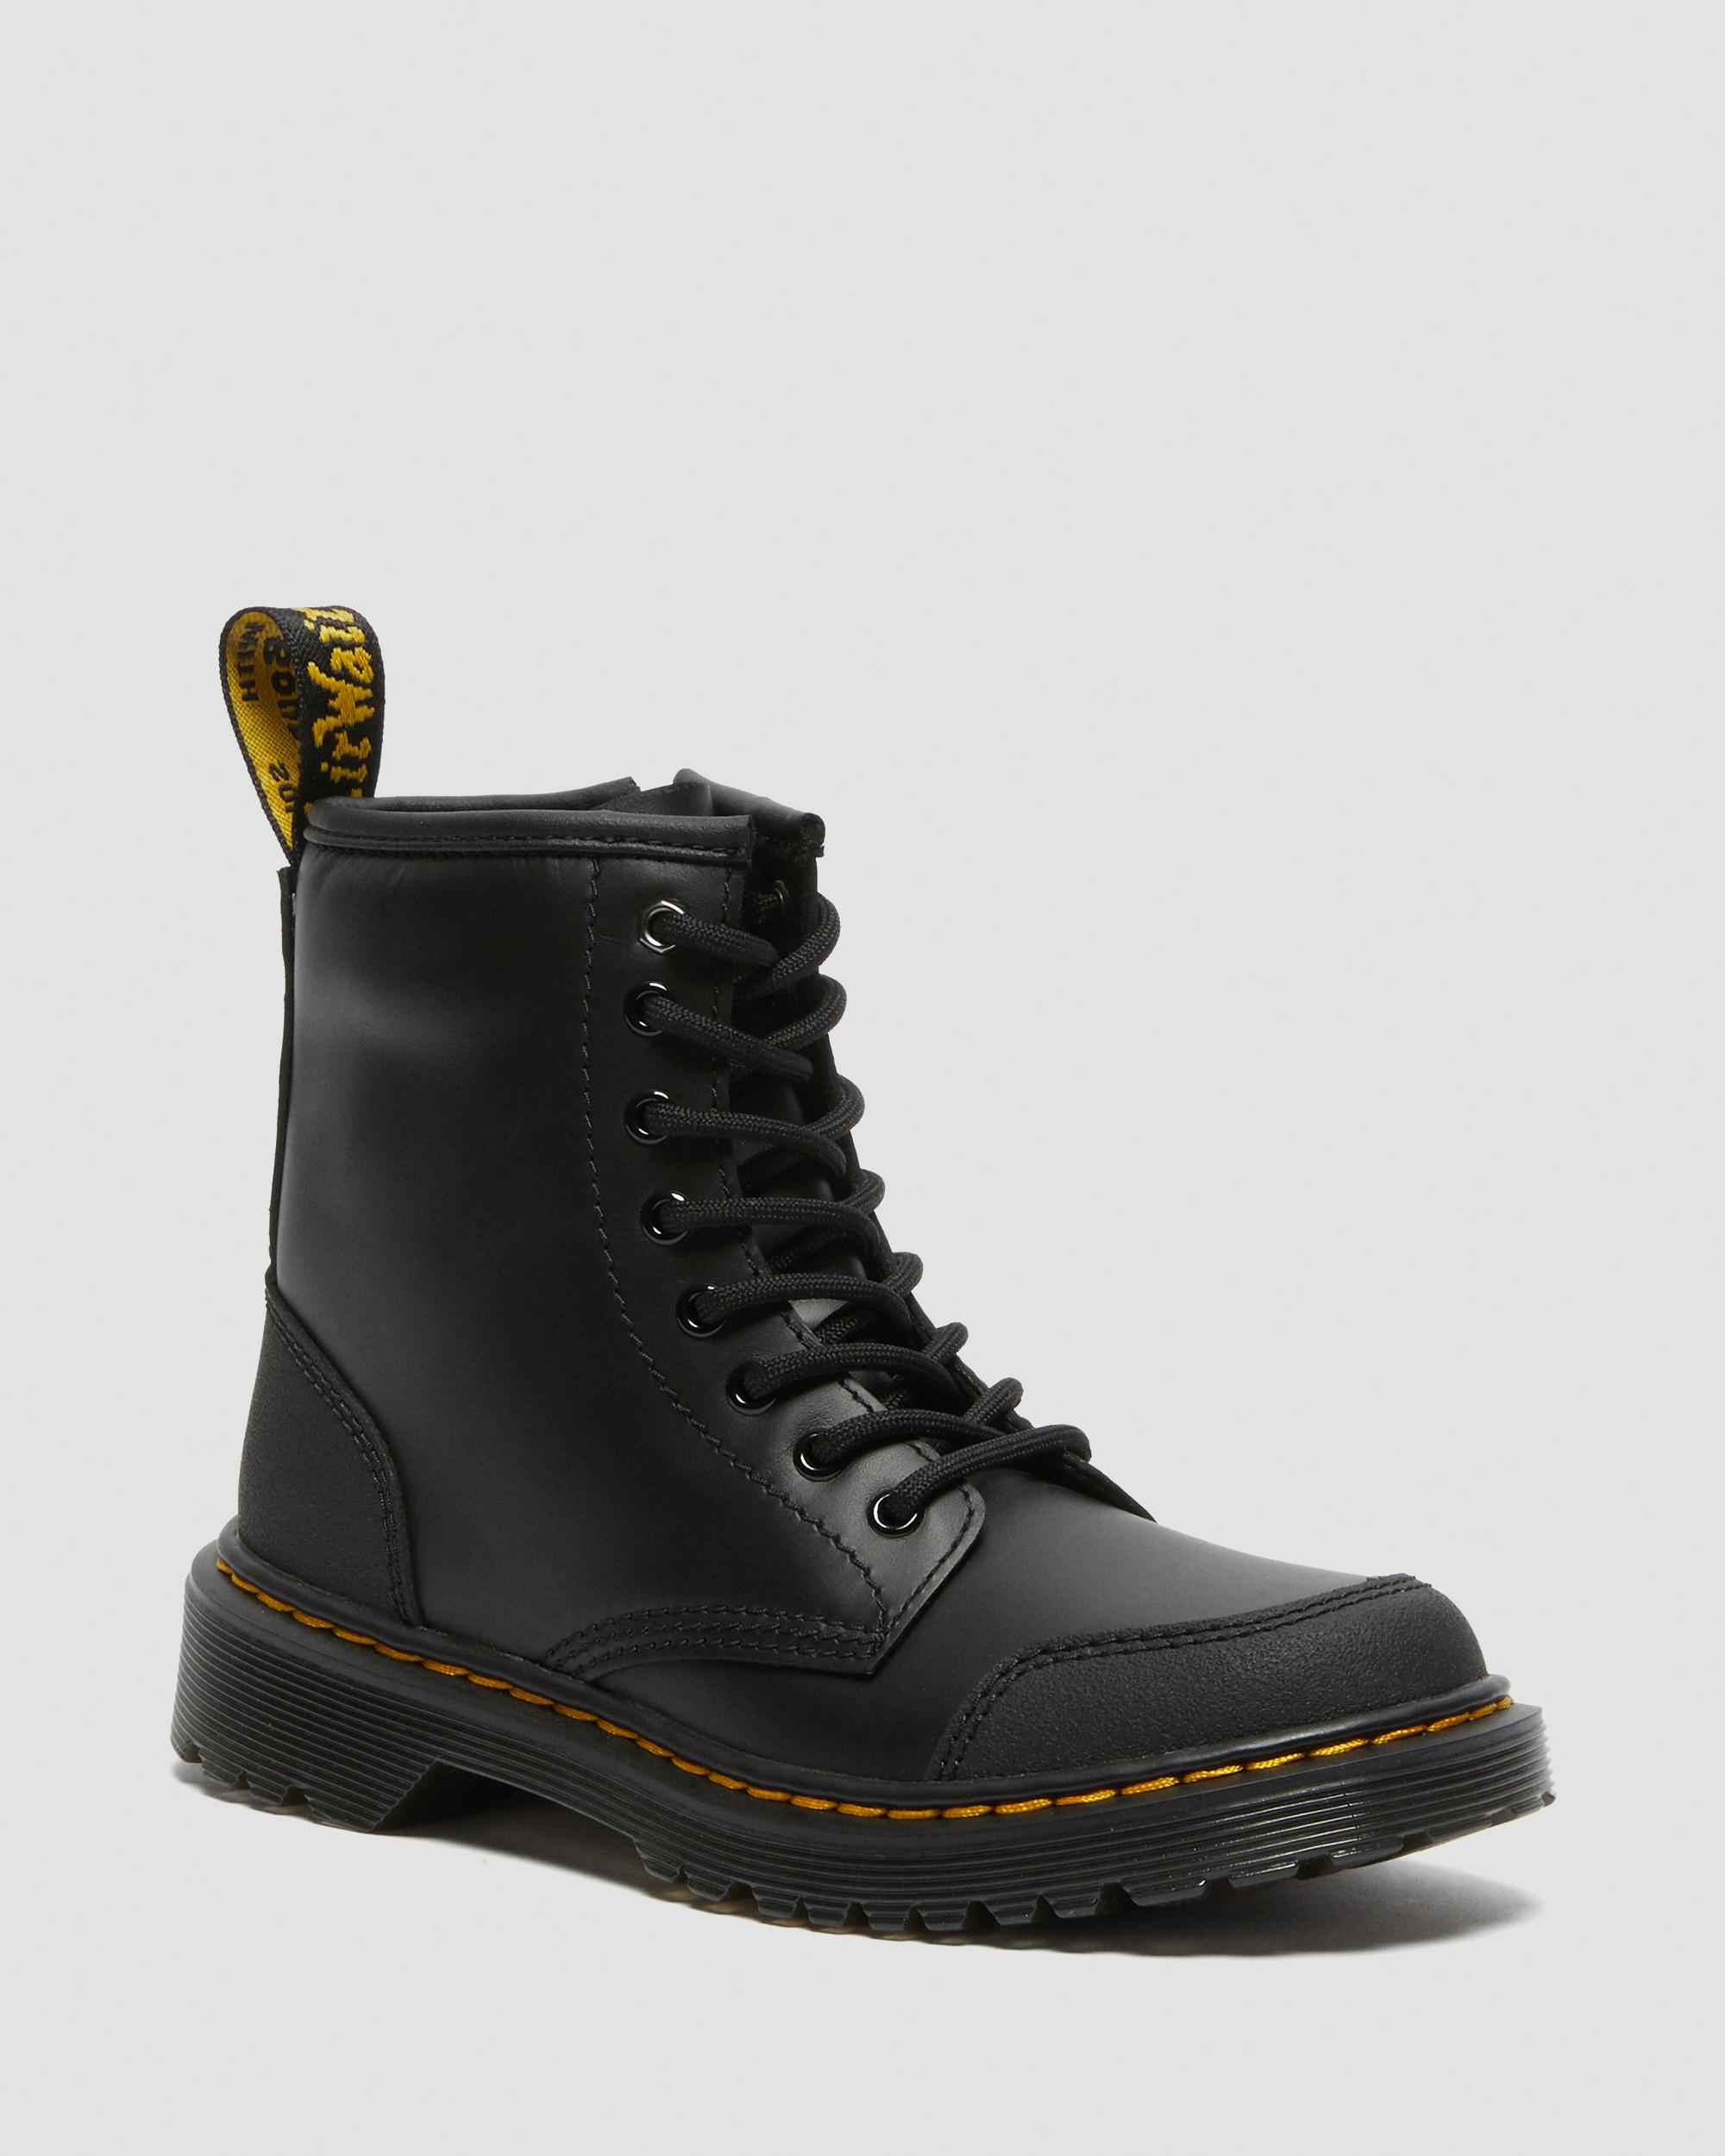 Junior 1460 Overlay Leather Boots in Black | Dr. Martens